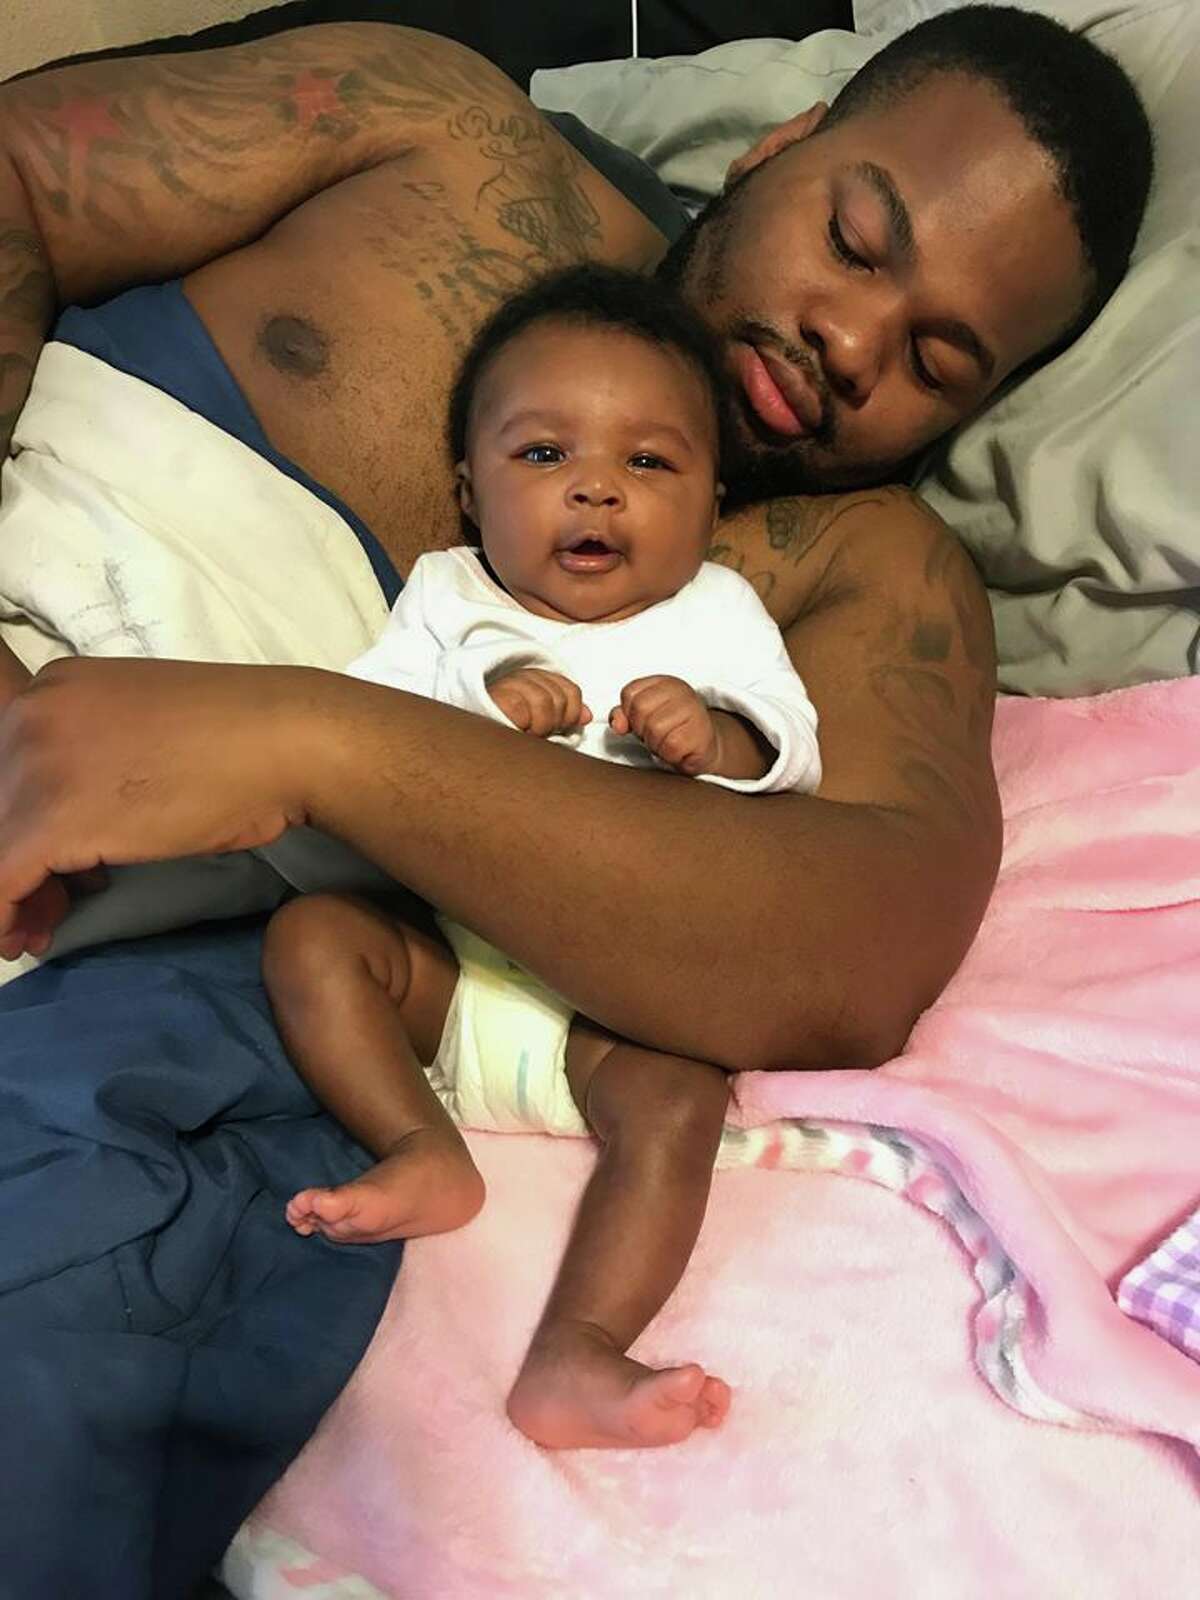 Demontae Walker, 25, with his daughter, Samiyah. A mugshot for Walker is not yet available.